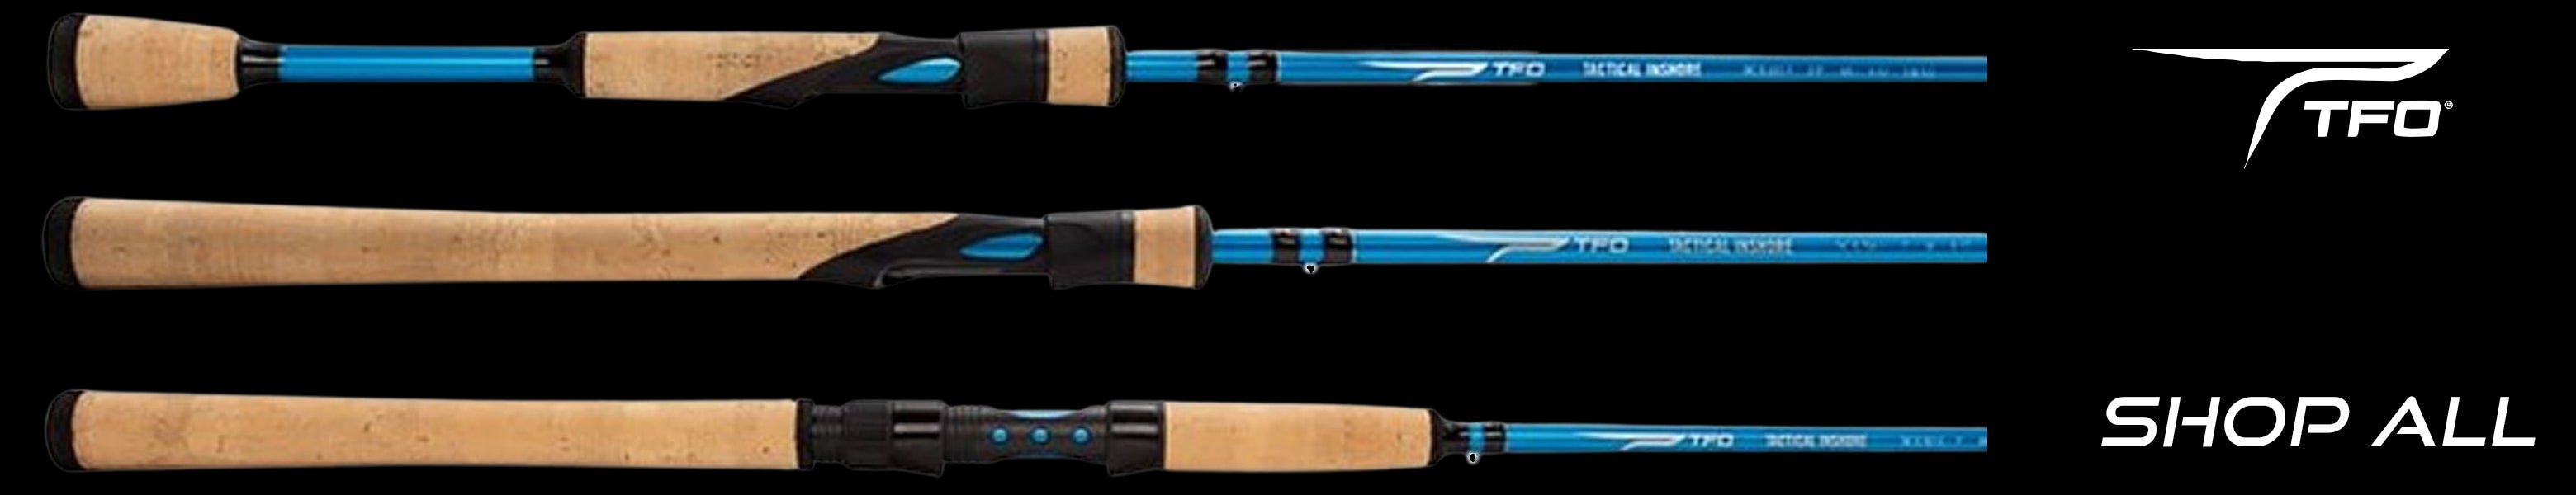 Temple Fork Outfitter Fishing Poles Shop All